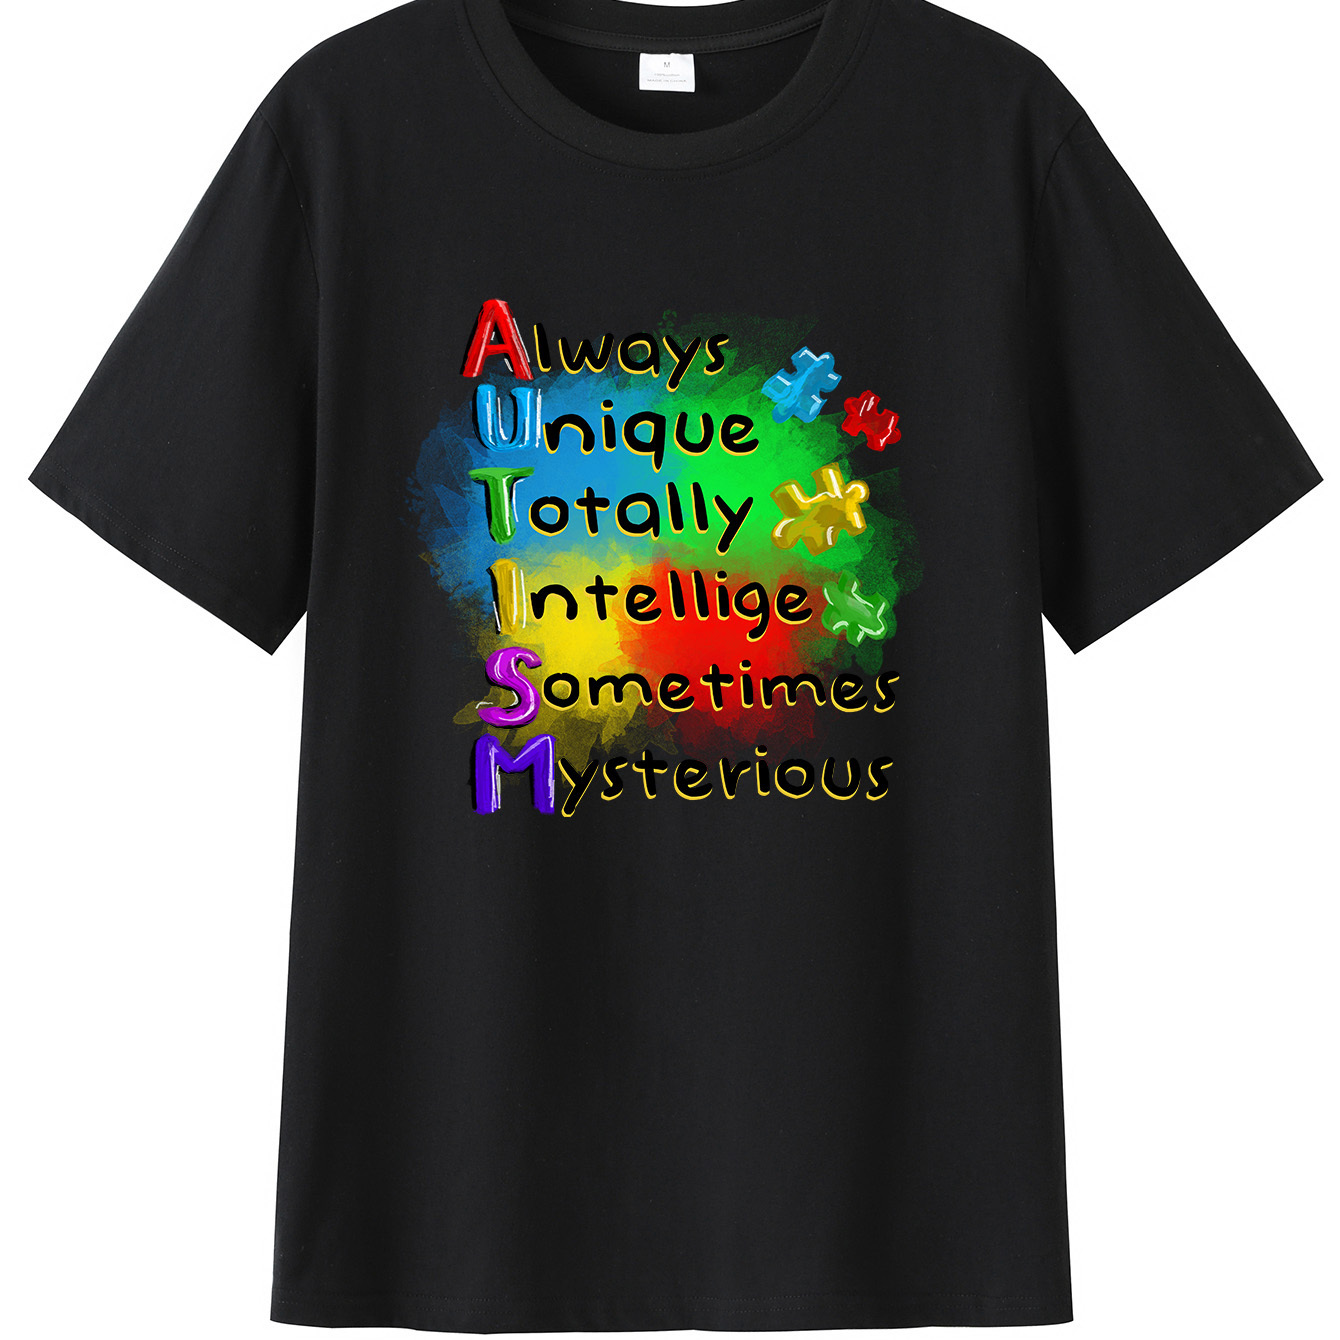 

T-shirt For Men, Casual Summer Top, Comfortable And Fashion Crew Neck Short Sleeve With Rainbow Color Autism Creative Print, Suitable For Daily Wear